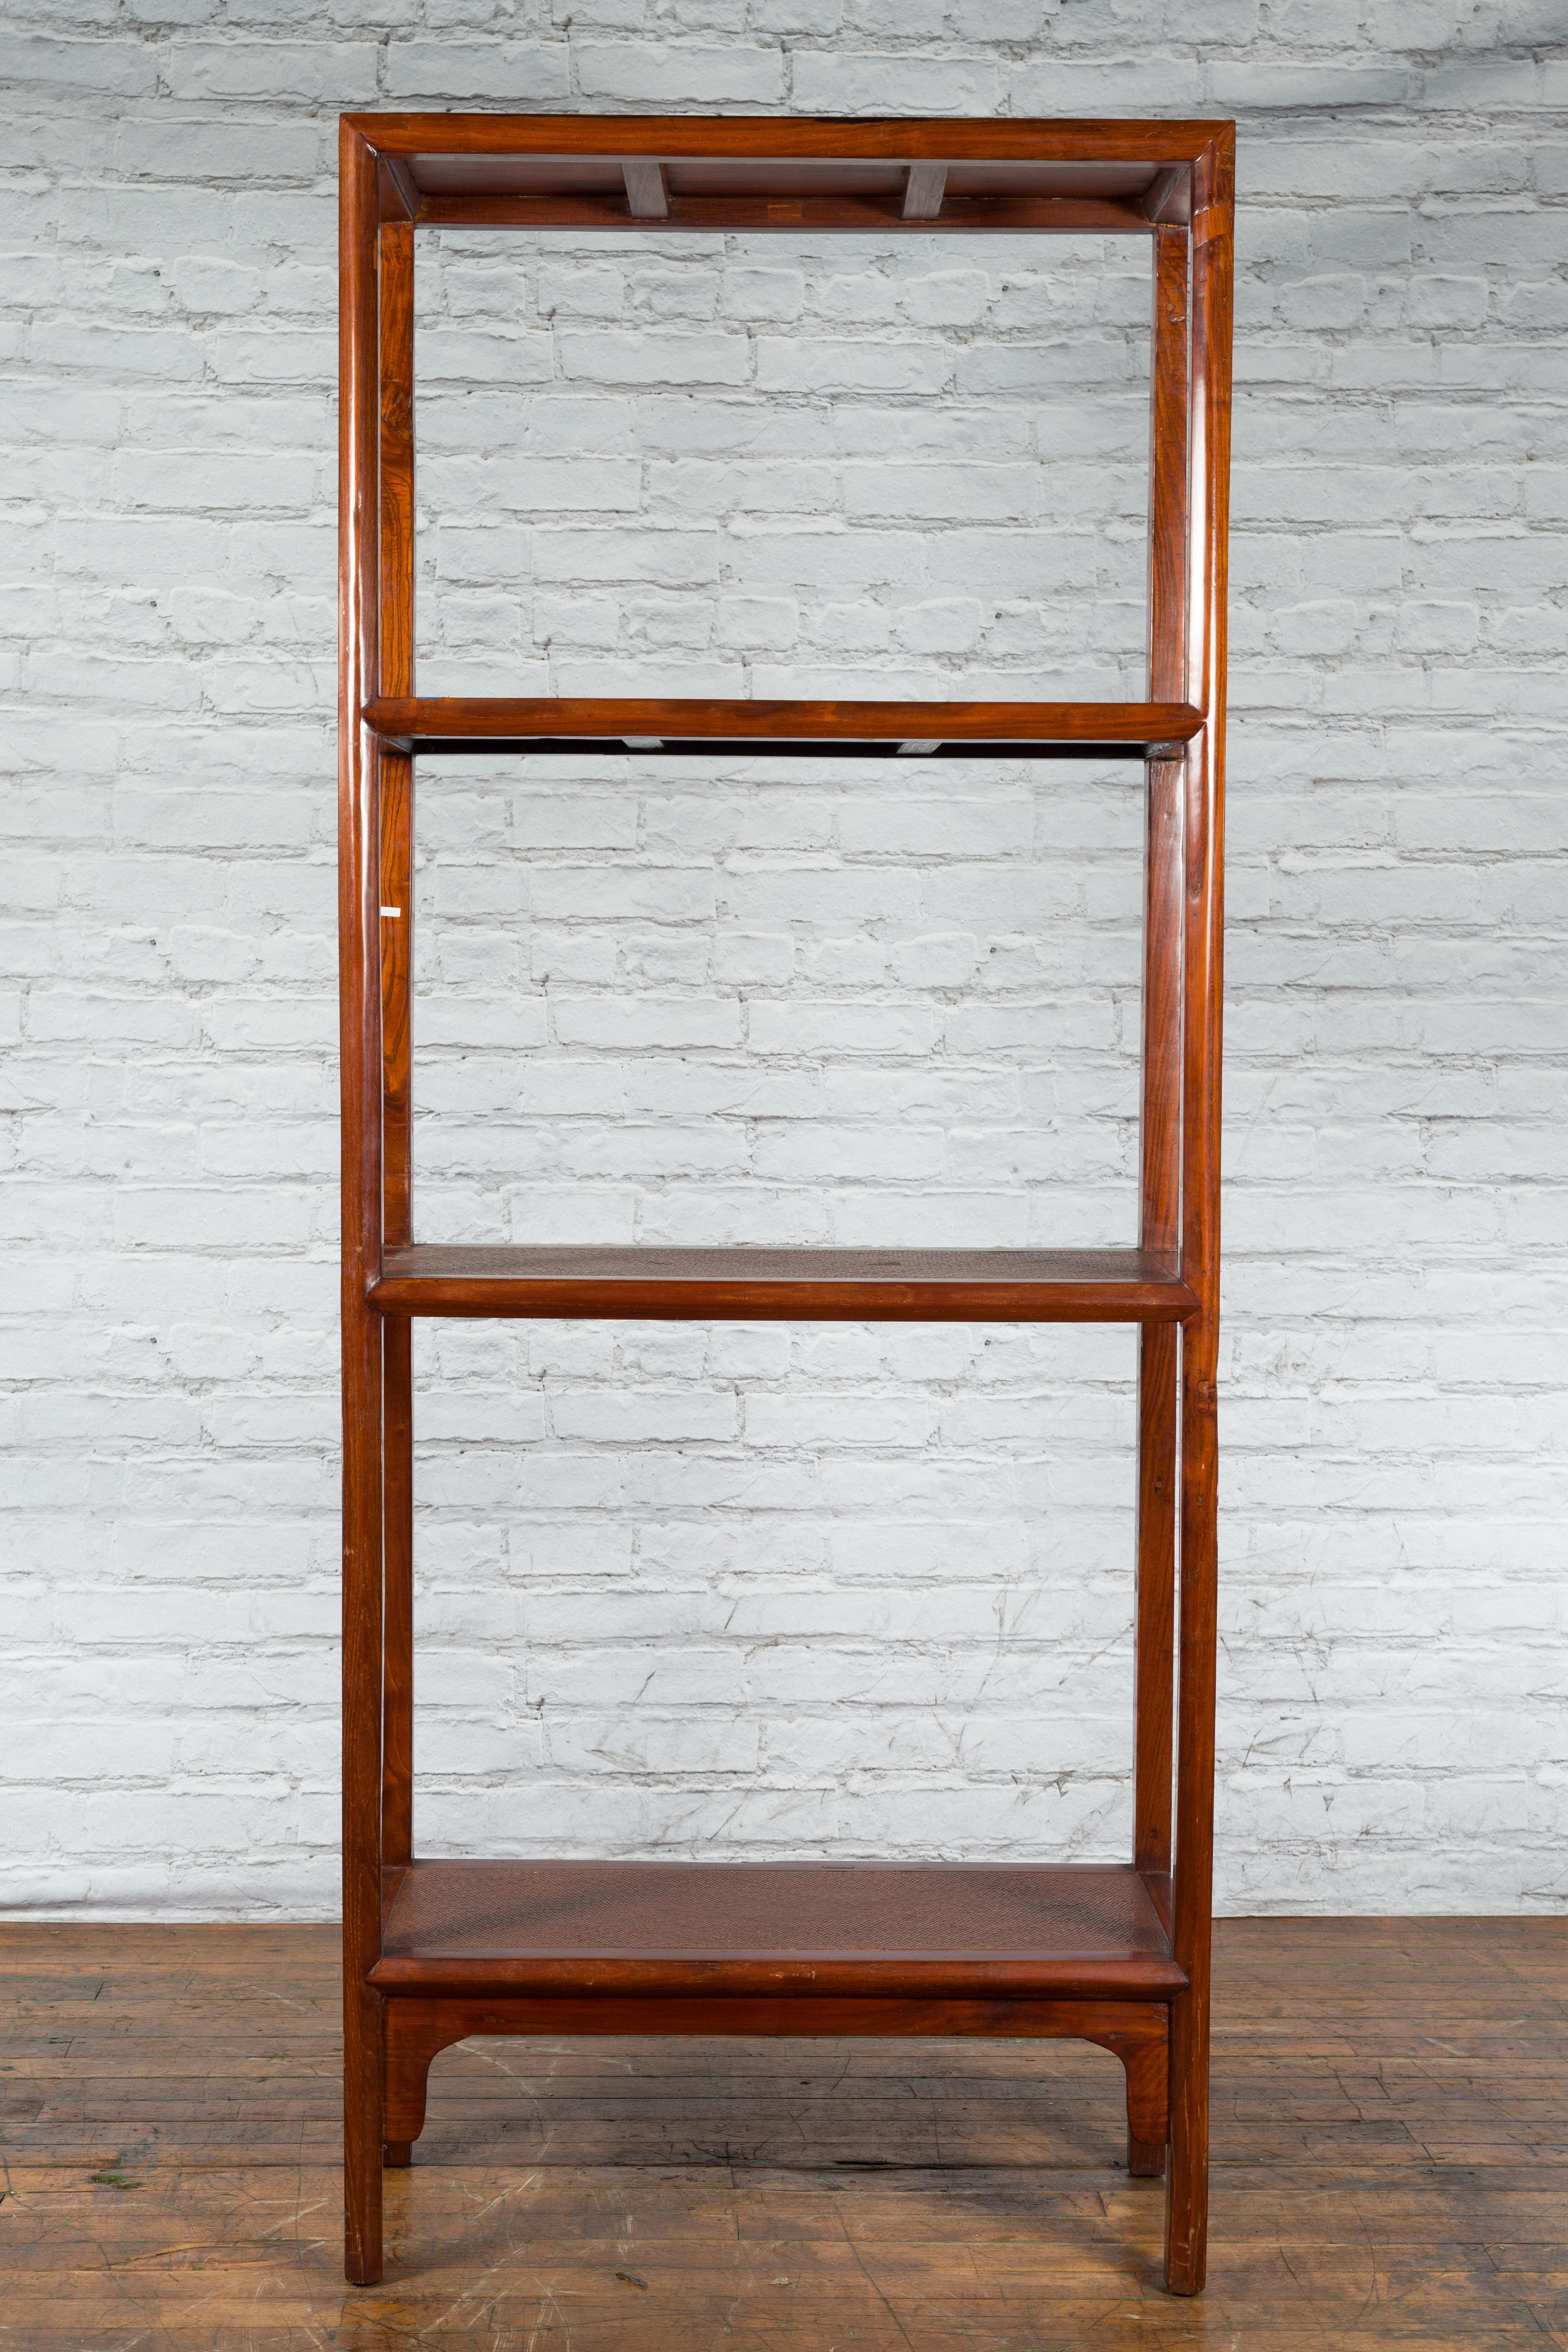 Chinese Early 20th Century Wooden Bookcase with Woven Rattan Shelves and Apron For Sale 6